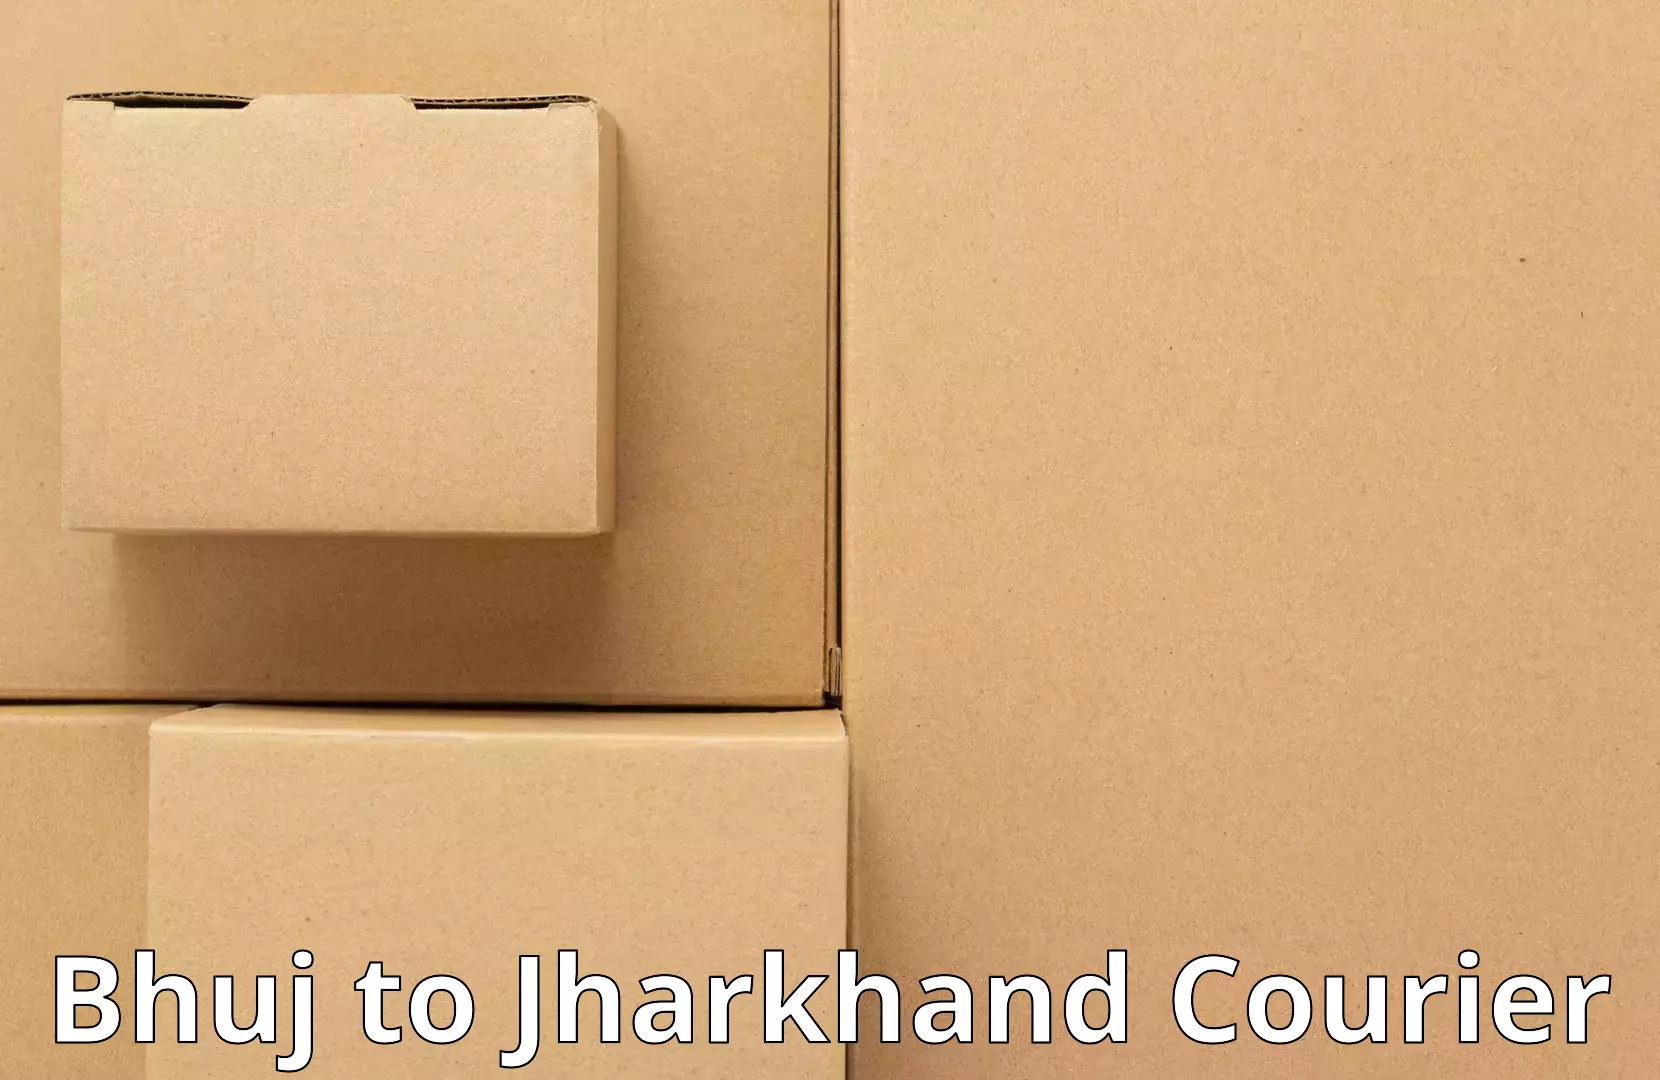 Household transport experts Bhuj to Jharkhand